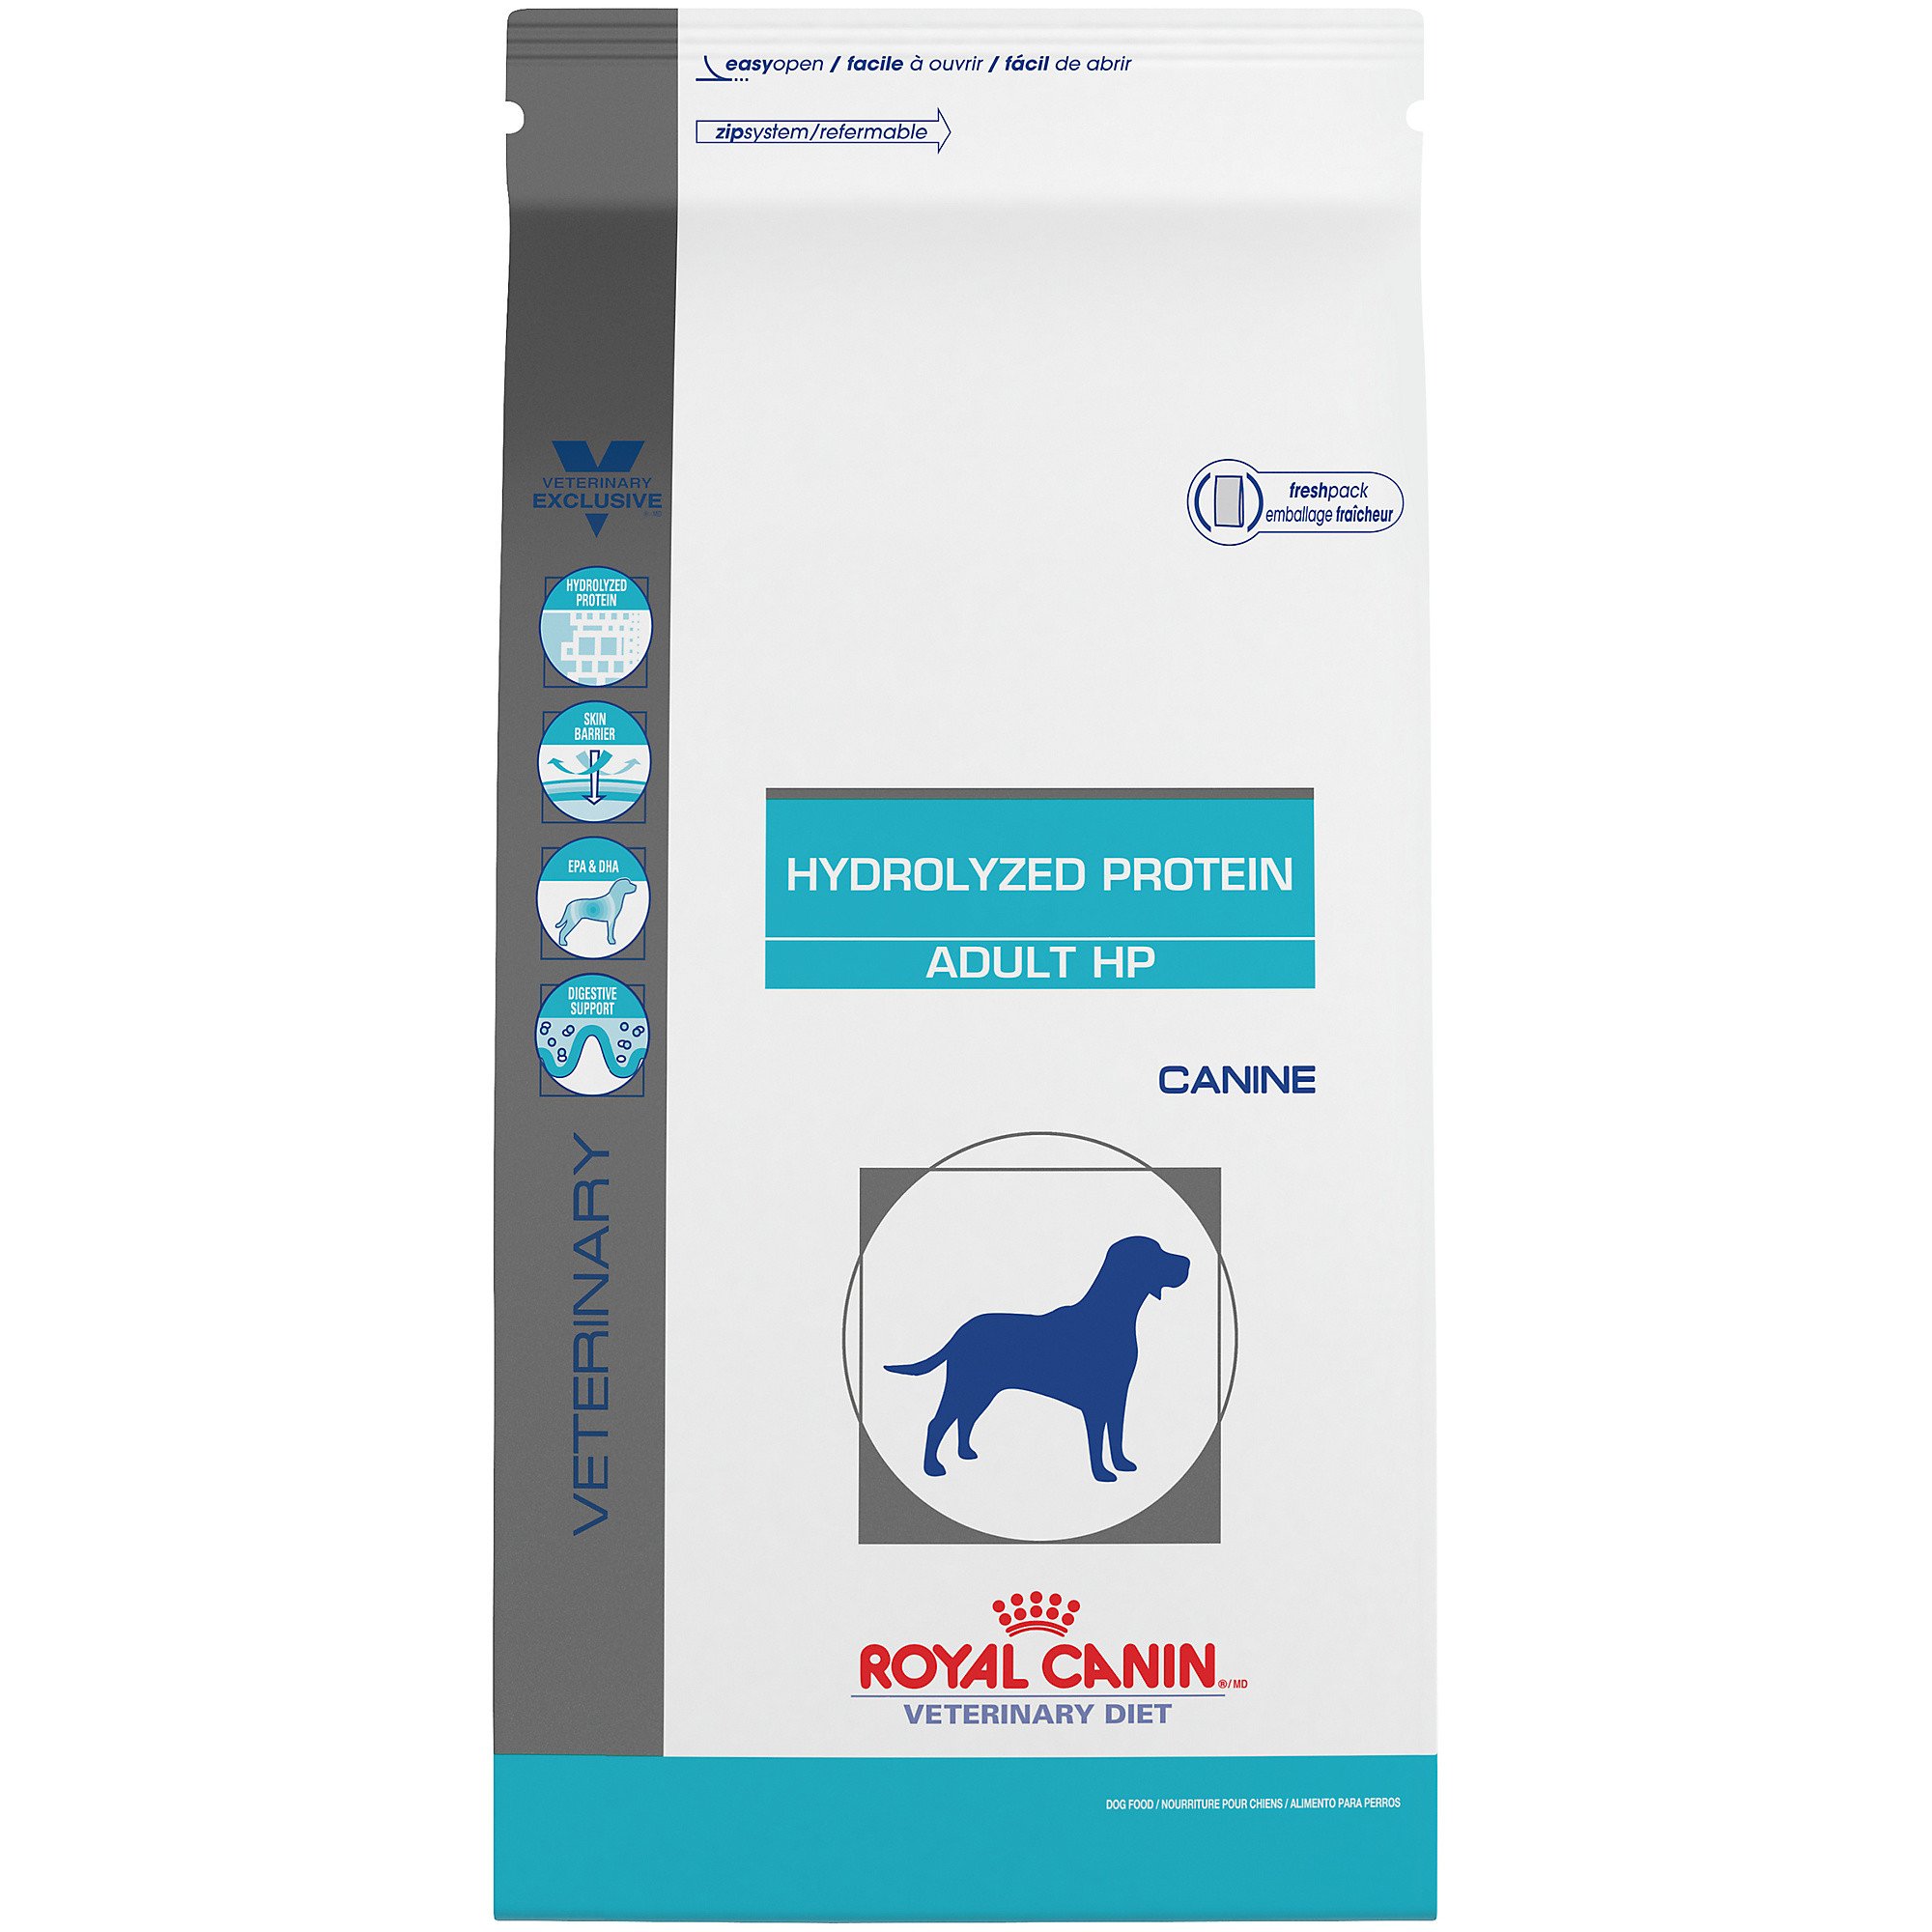 Royal Canin Veterinary Diet Canine Hydrolyzed Protein Adult HP Dry Dog